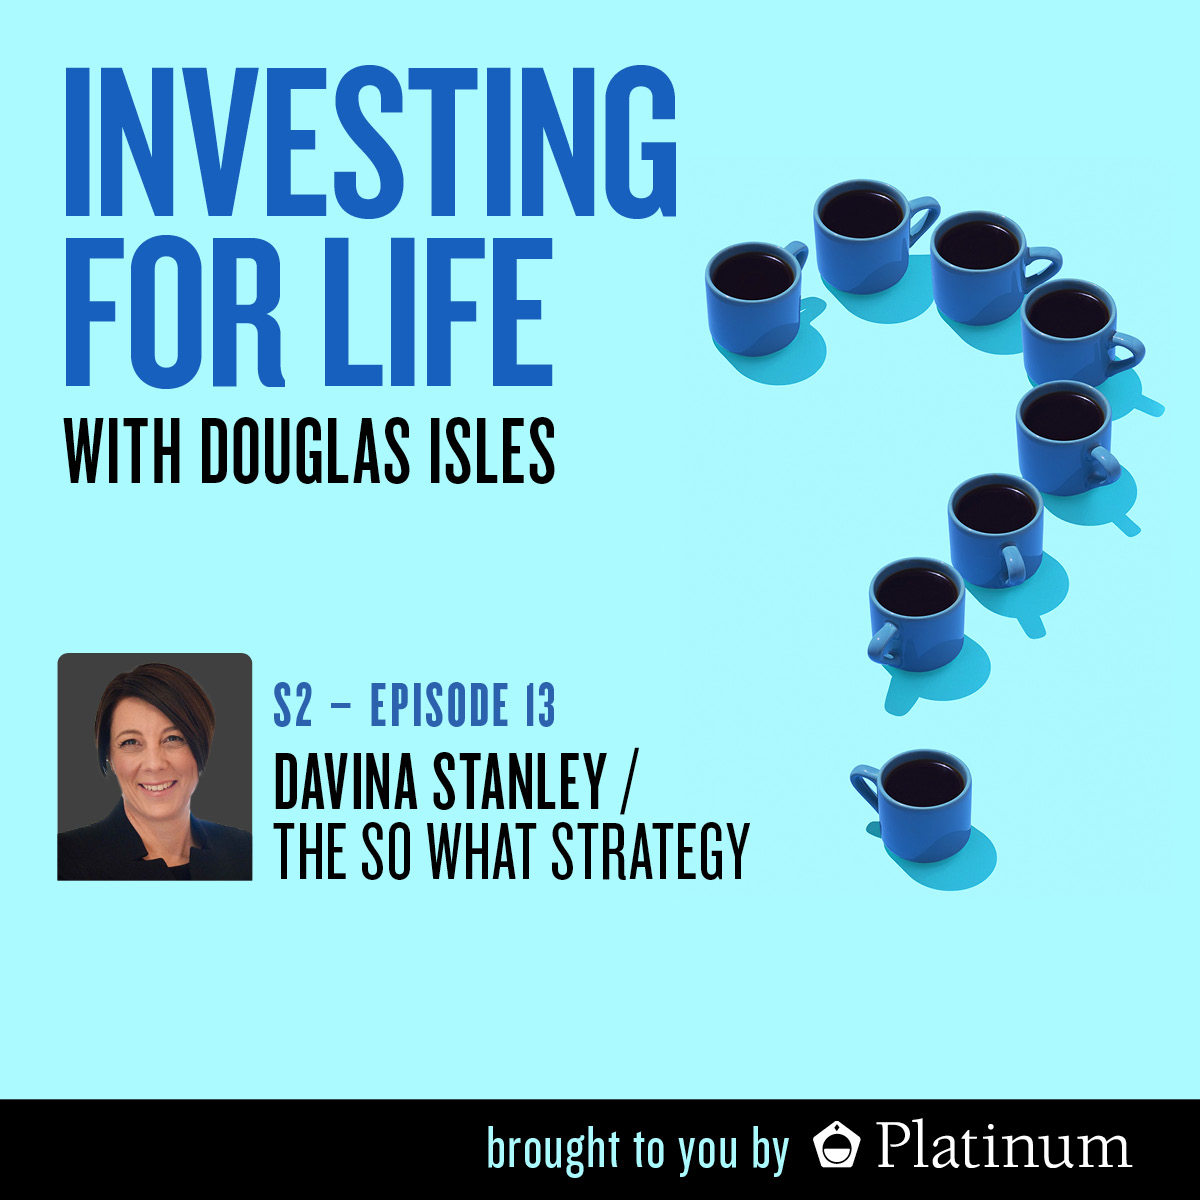 Davina Stanley, Co-author of The So What Strategy